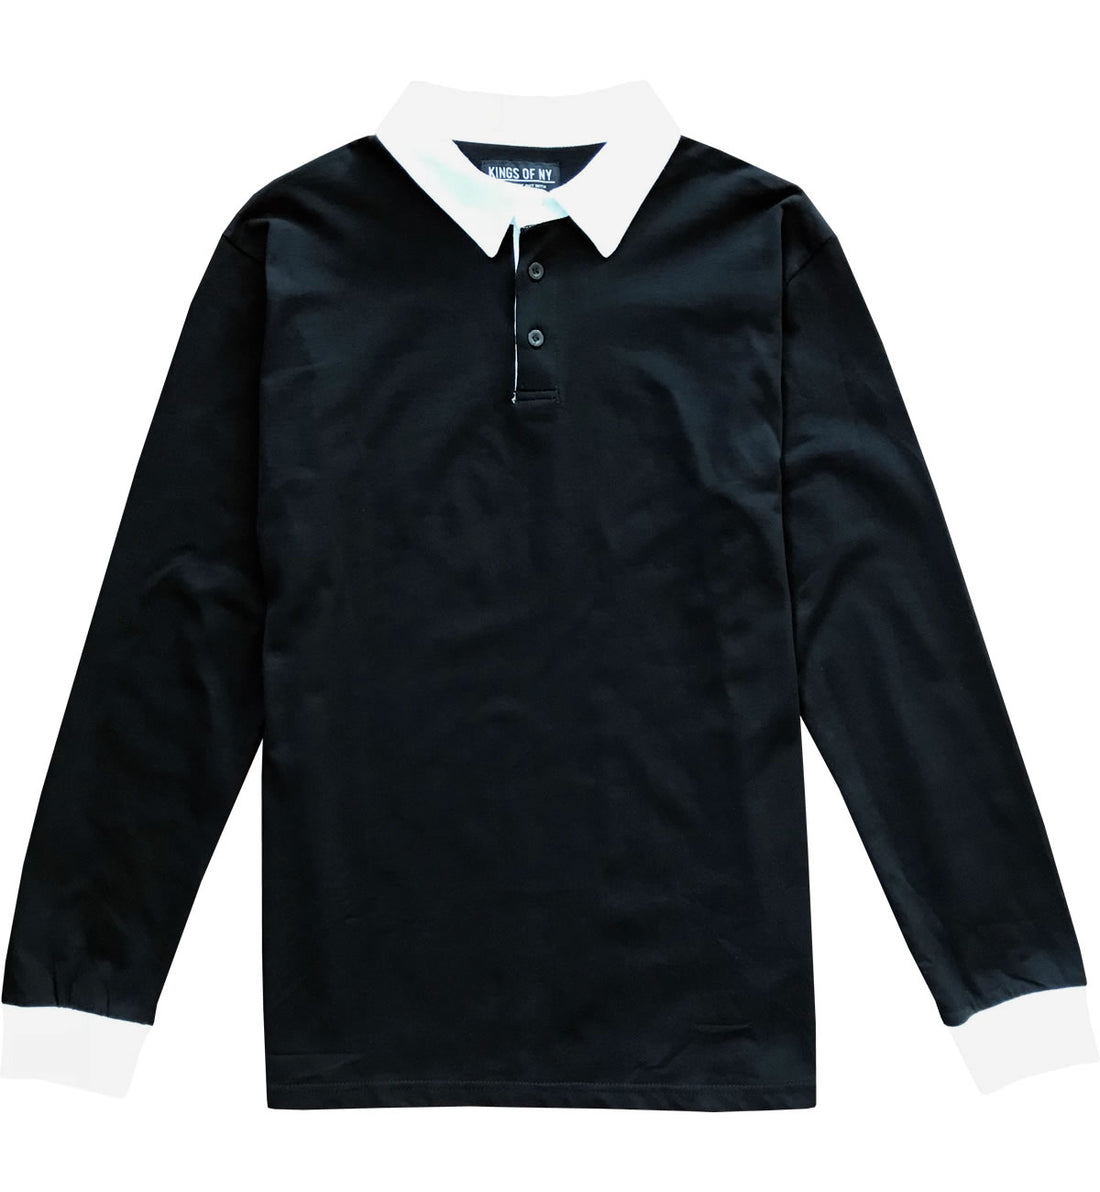 Solid Long Sleeve Cotton Collar with Logo Polo Shirt - Black-S